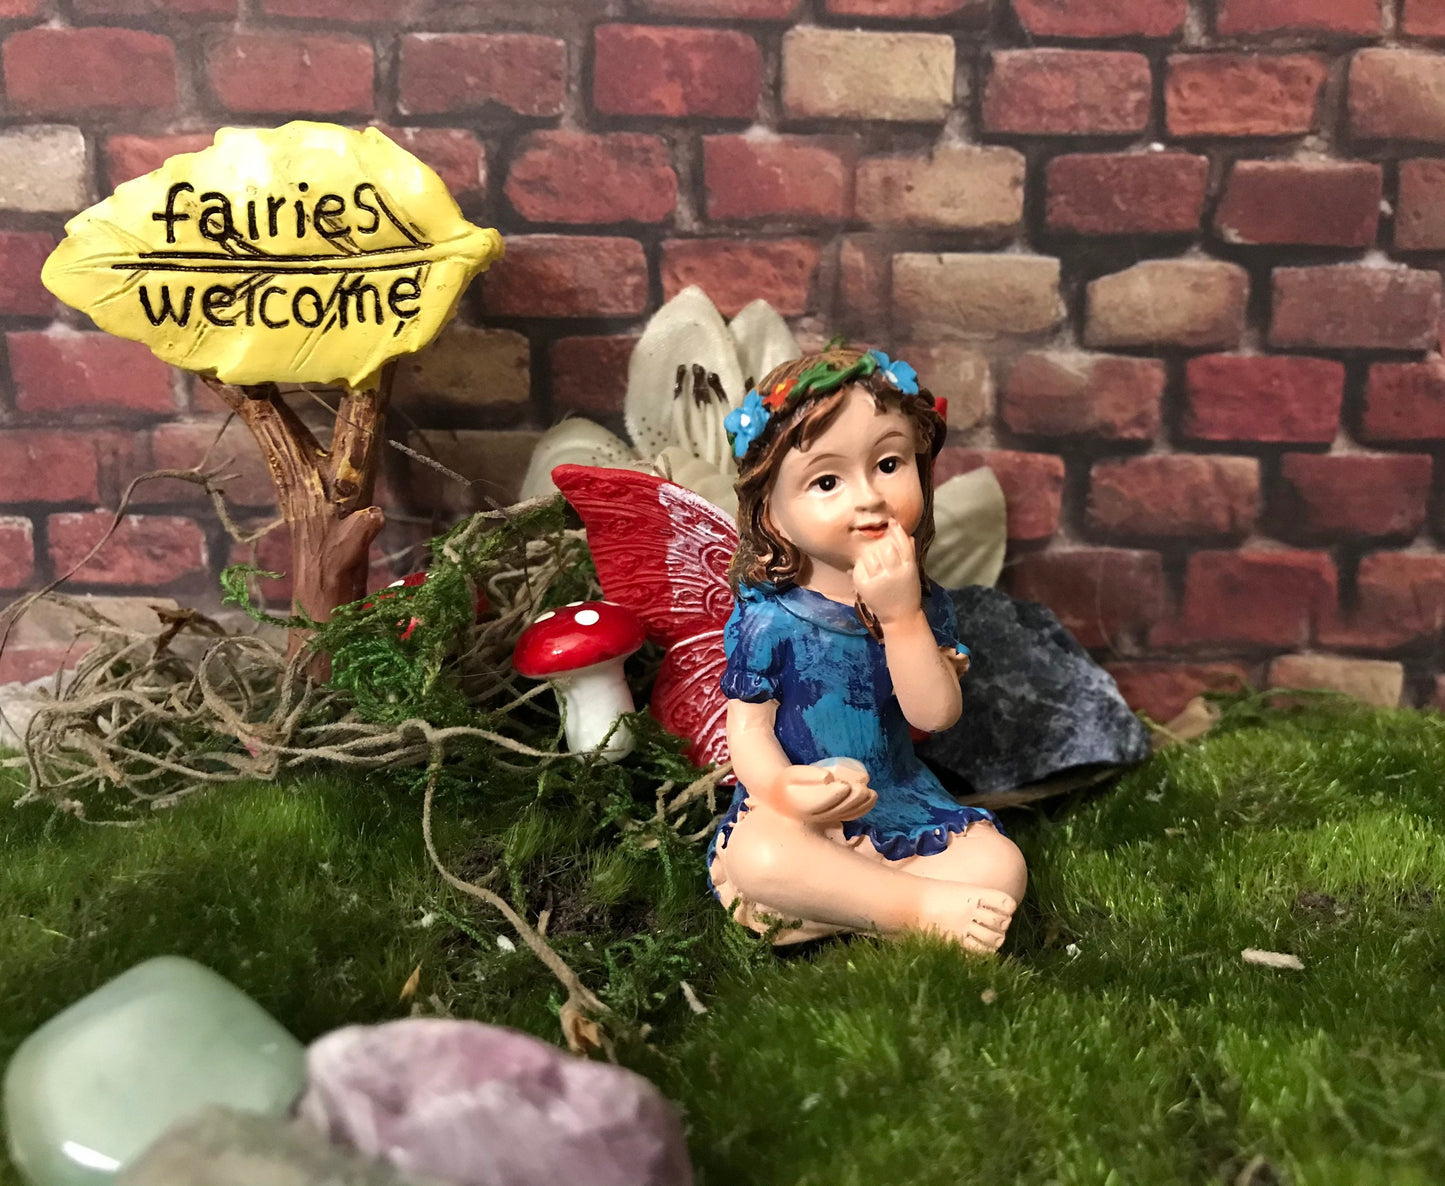 Just look at these sweet faces! Set of 4 miniature fairy garden fairy holding a cute gem